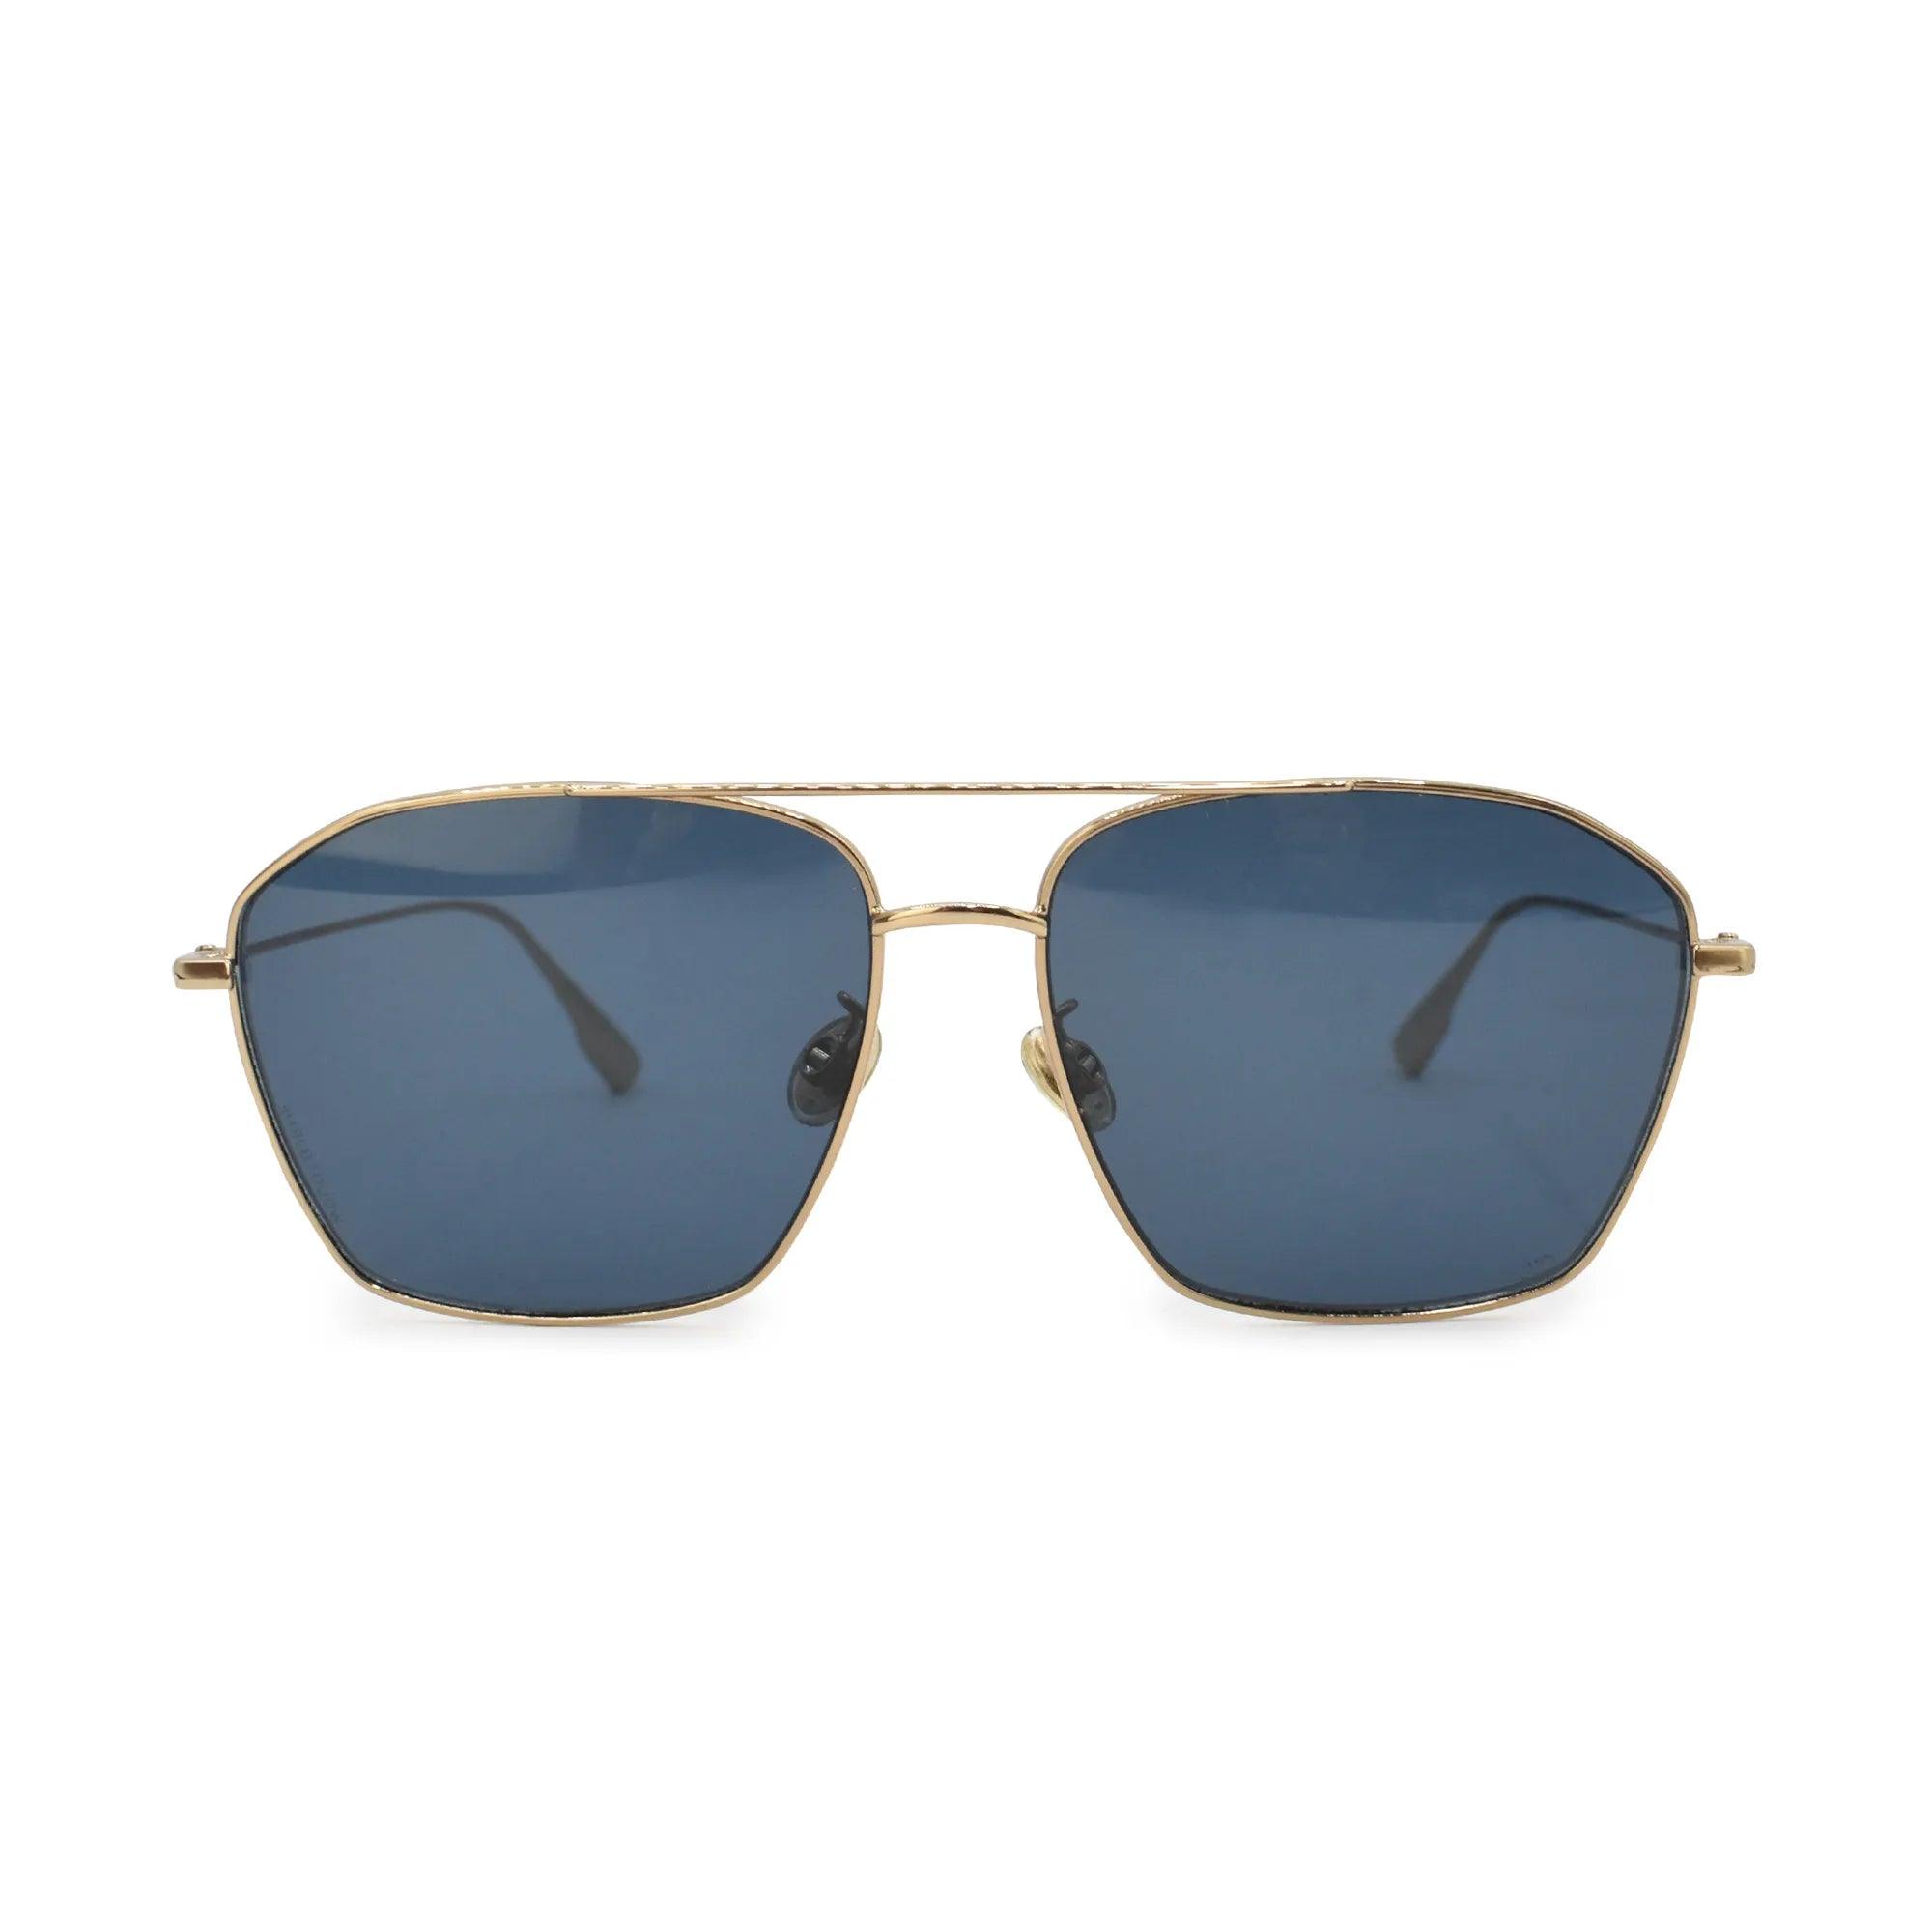 Dior 'Stellaire' Sunglasses - Fashionably Yours